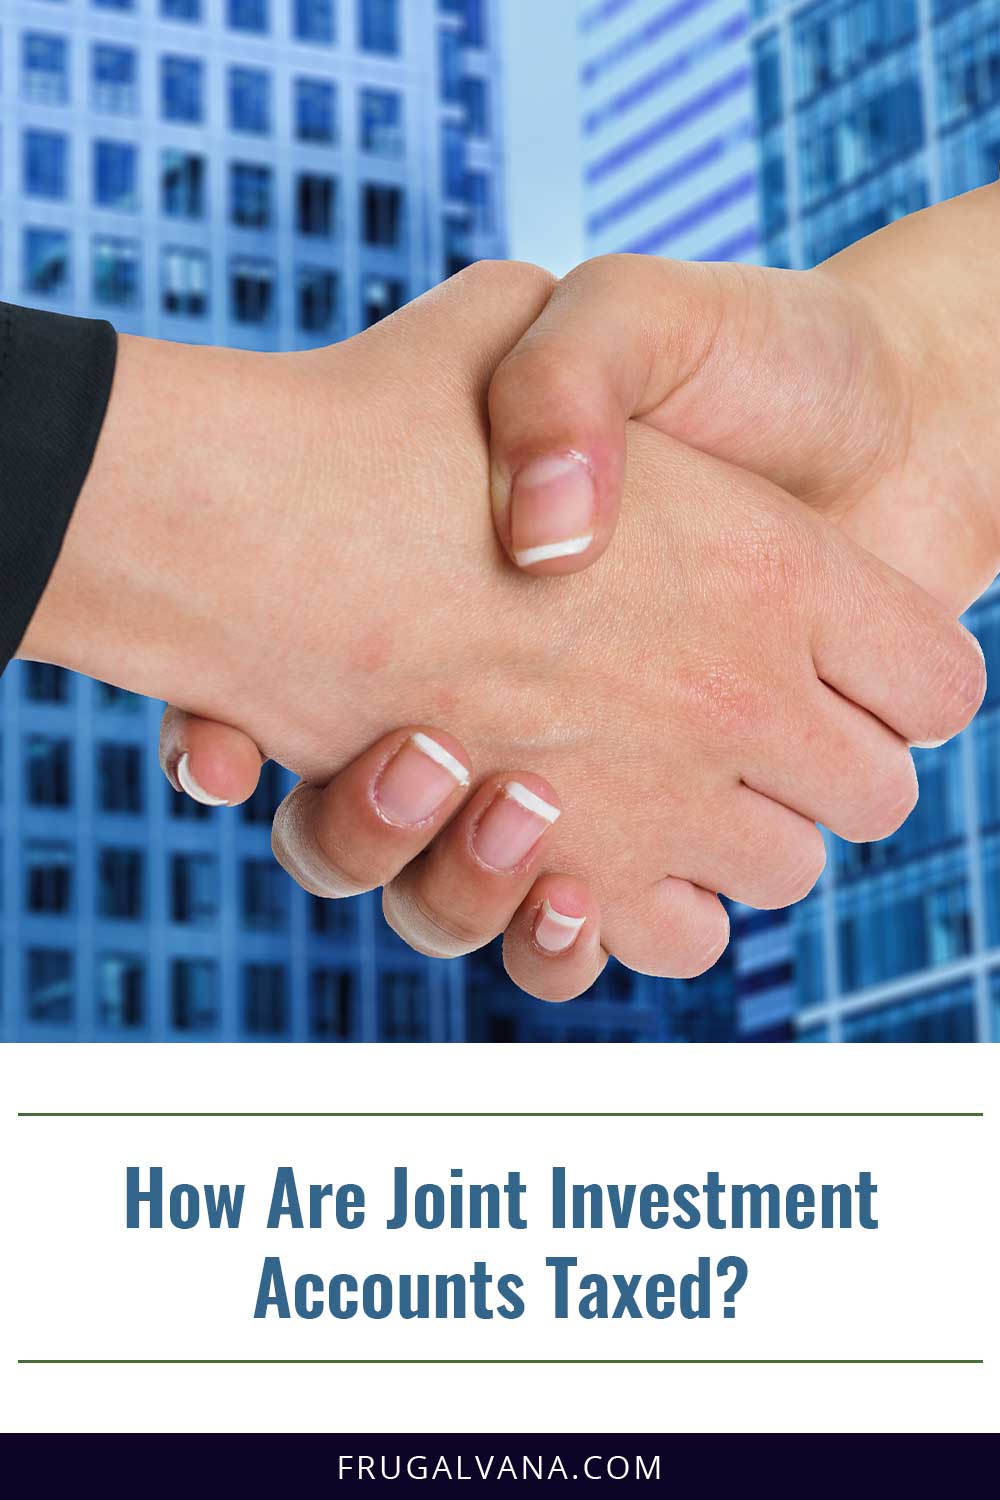 How Are Joint Investment Accounts Taxed?